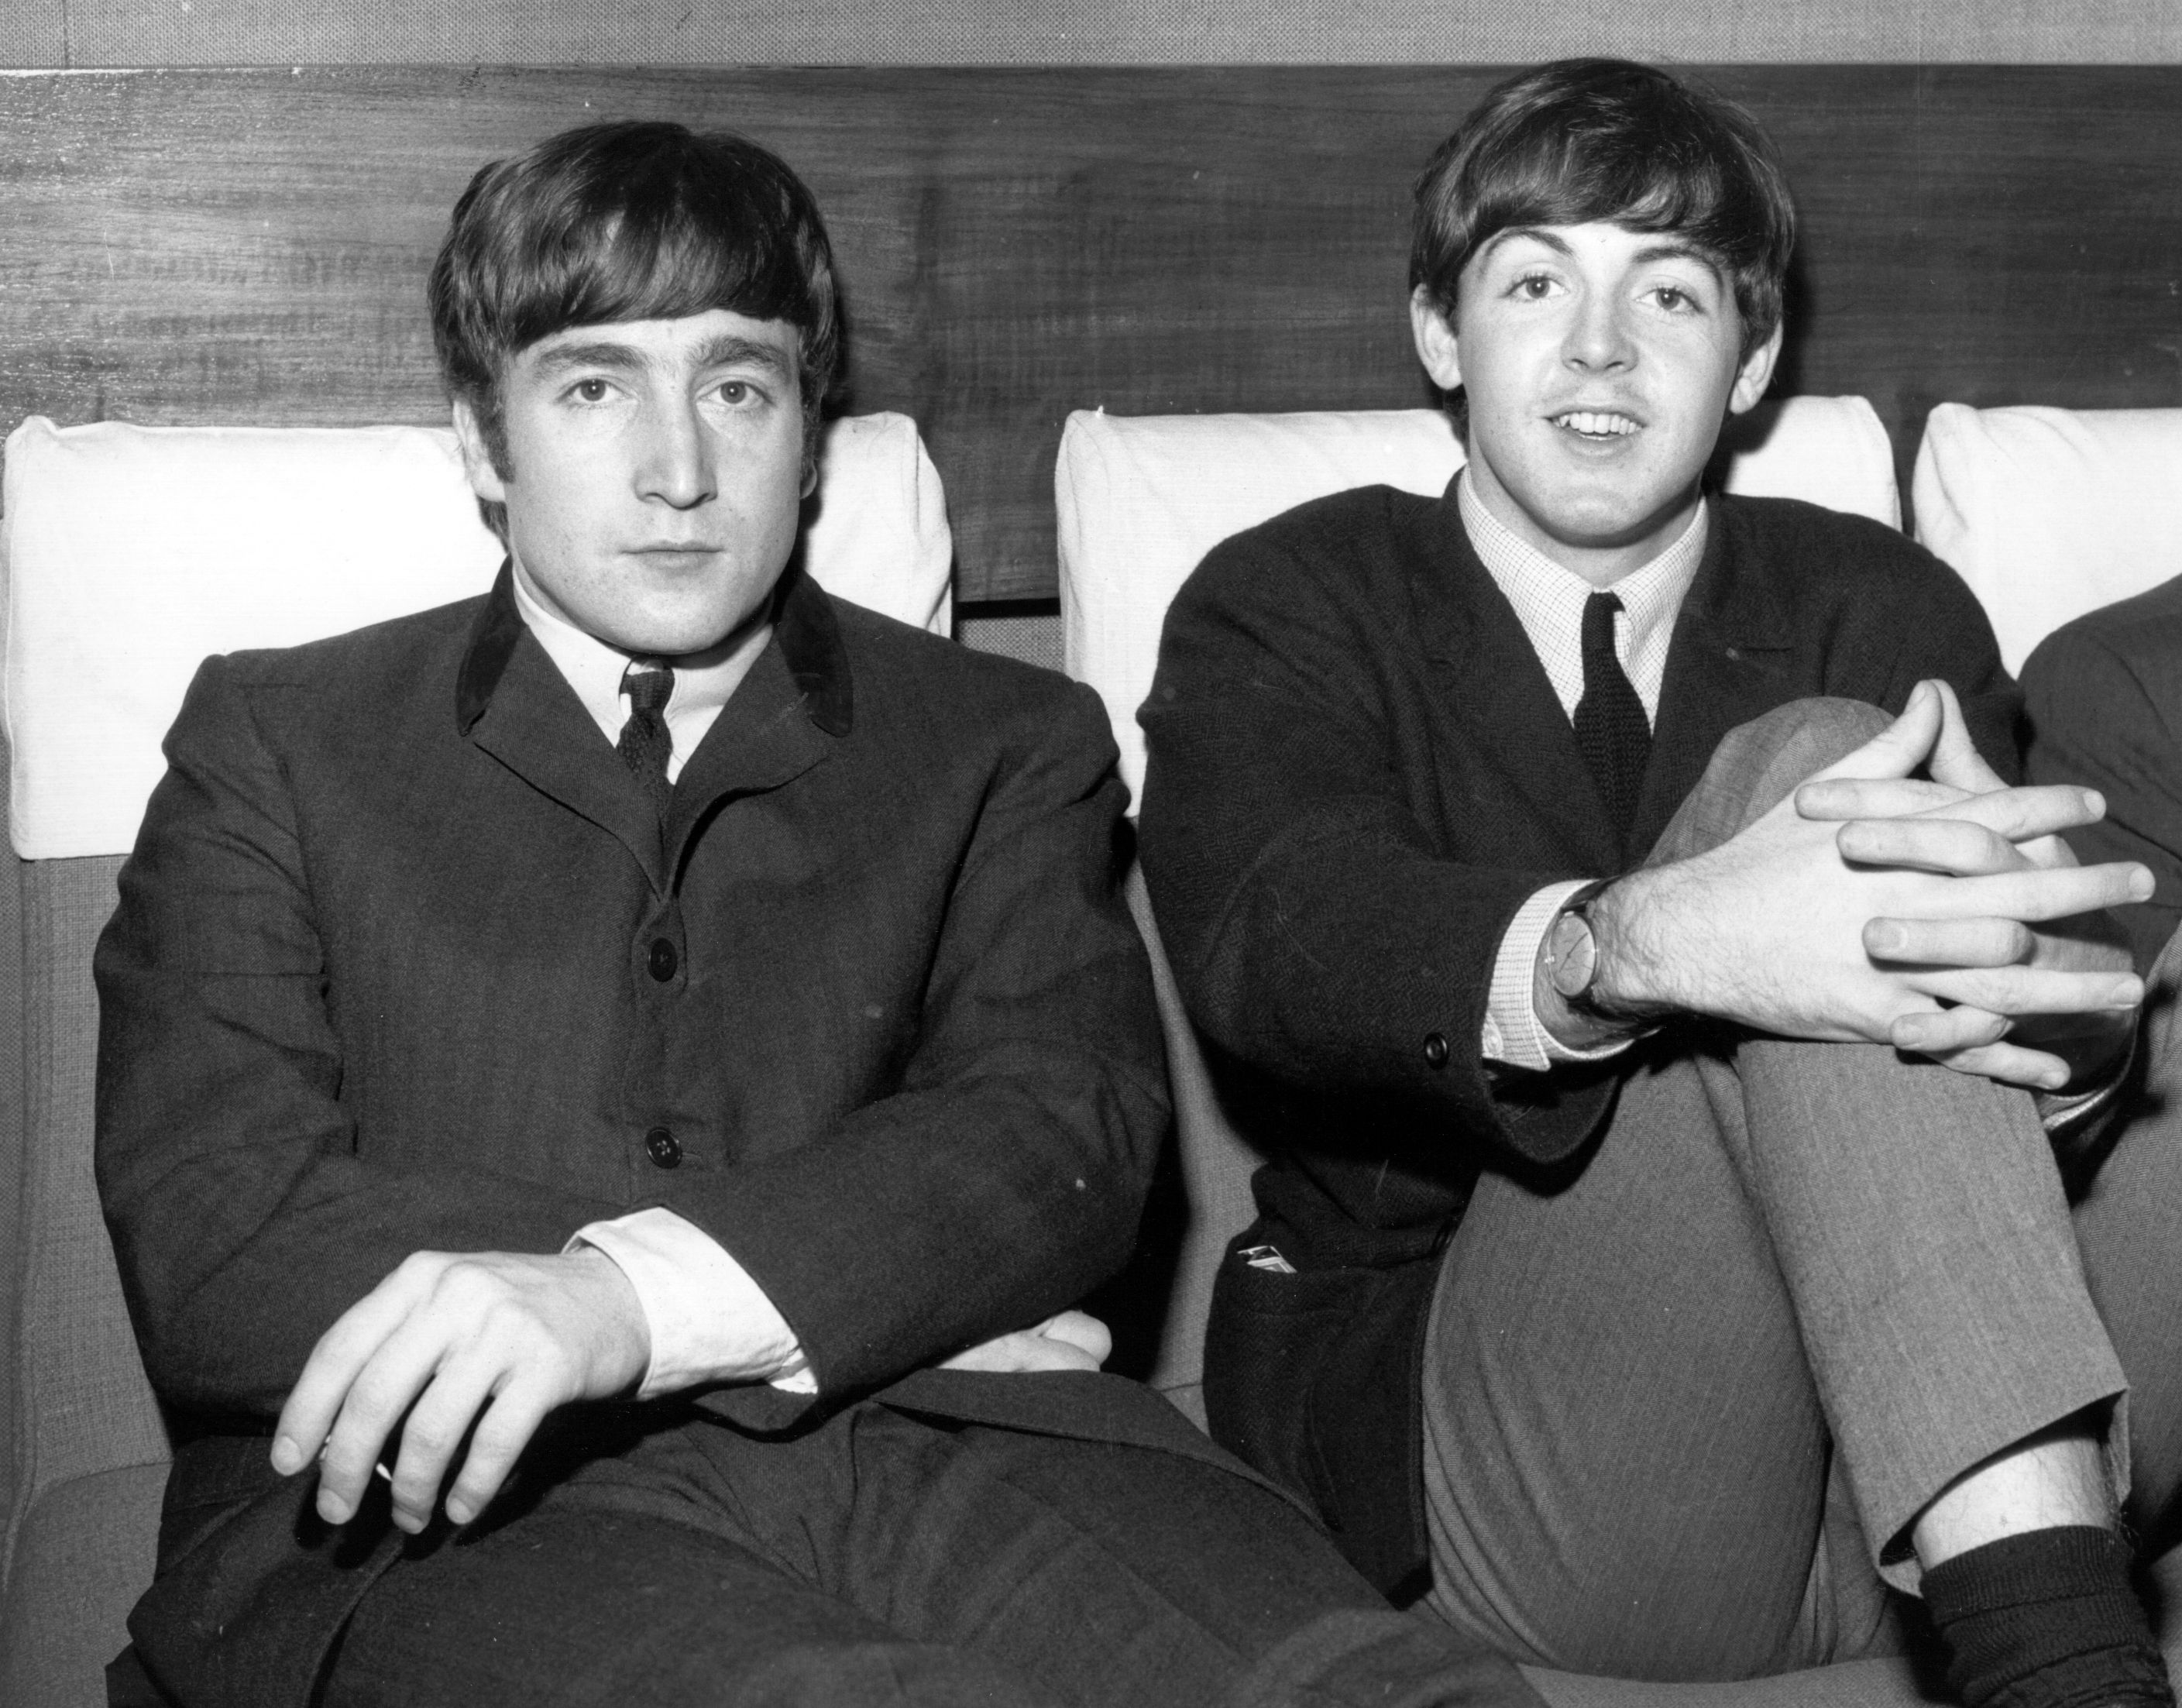 John Lennon and Paul McCartney of The Beatles sitting next to each other and wearing suits